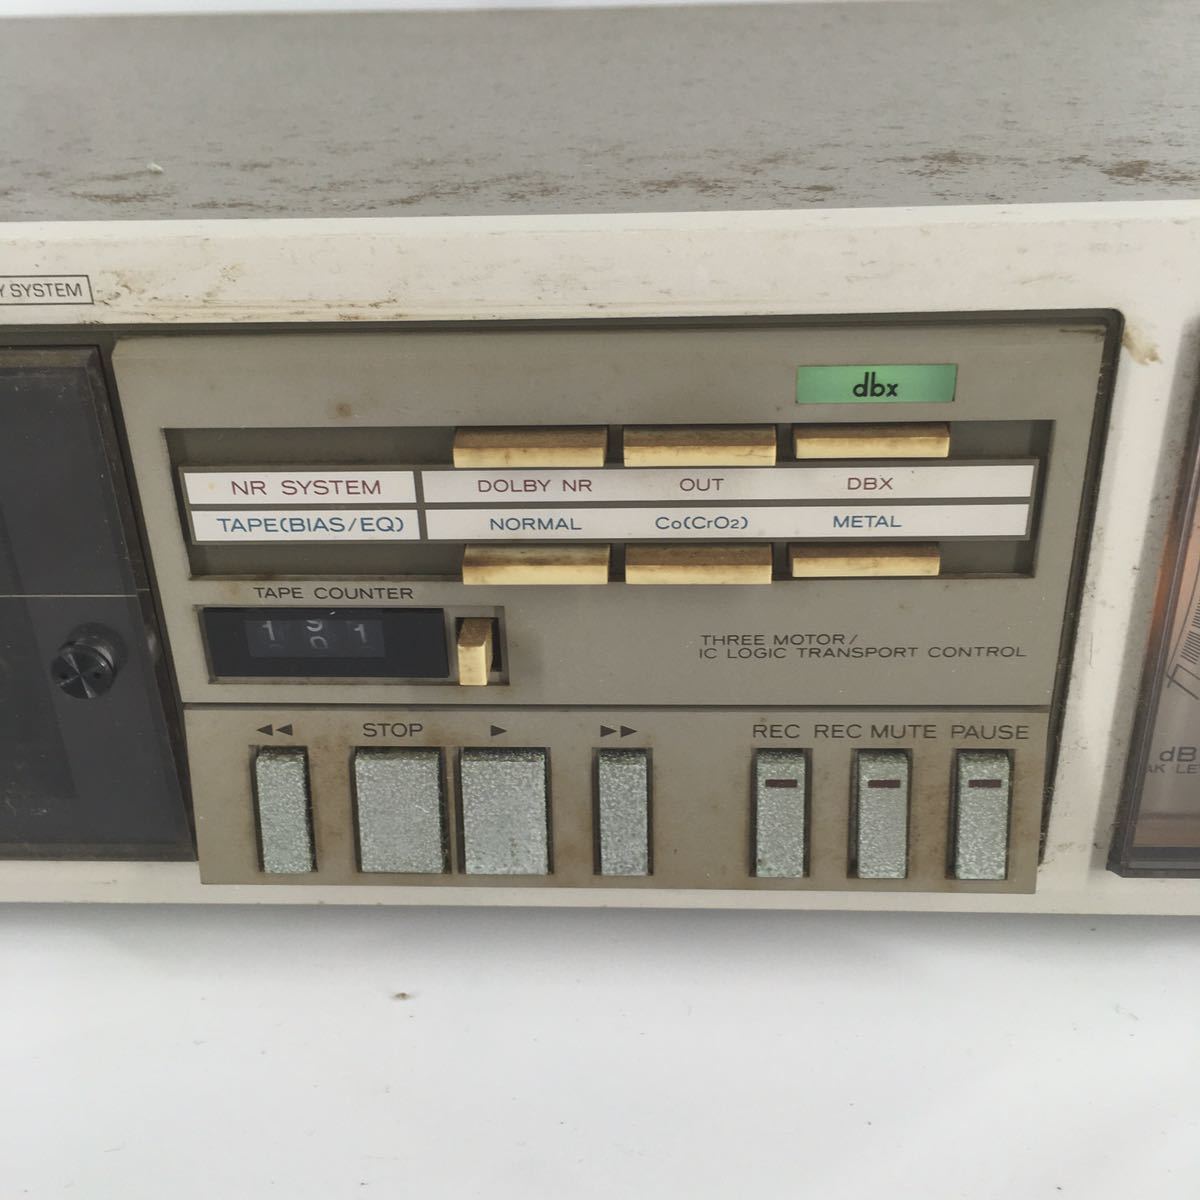 TEAC ティアック V-5RX カセットデッキ Stereo Cassette Deck 中古品　通電確認済み_画像3